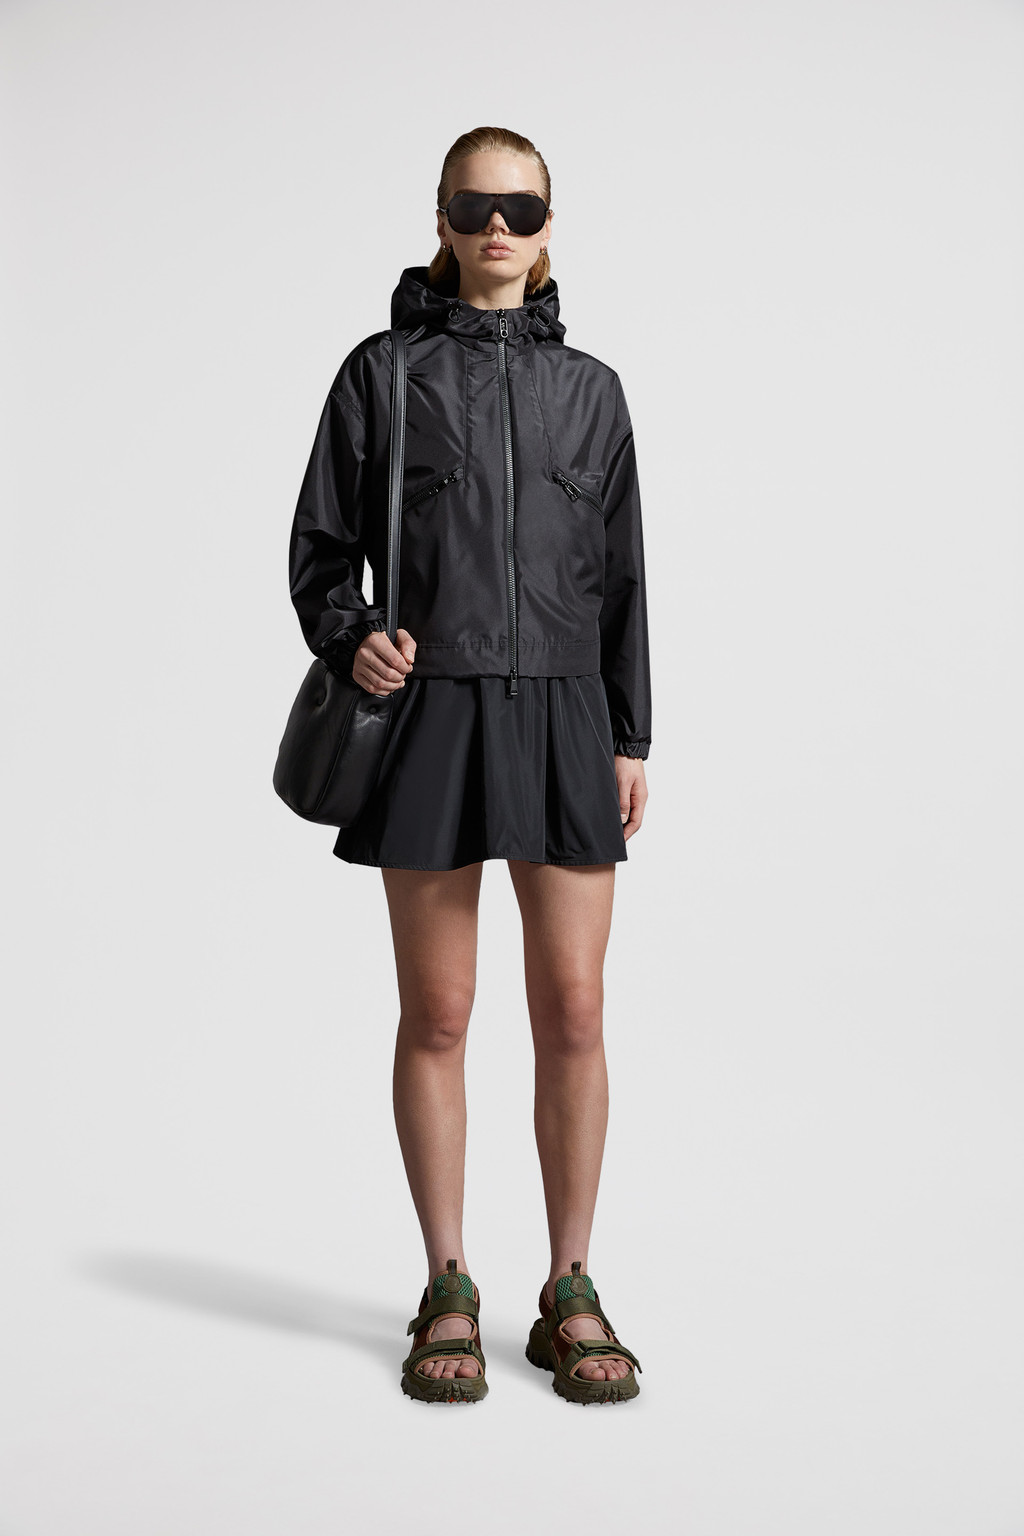 Outerwear for Women - Down Jackets, Coats and Vests | Moncler US